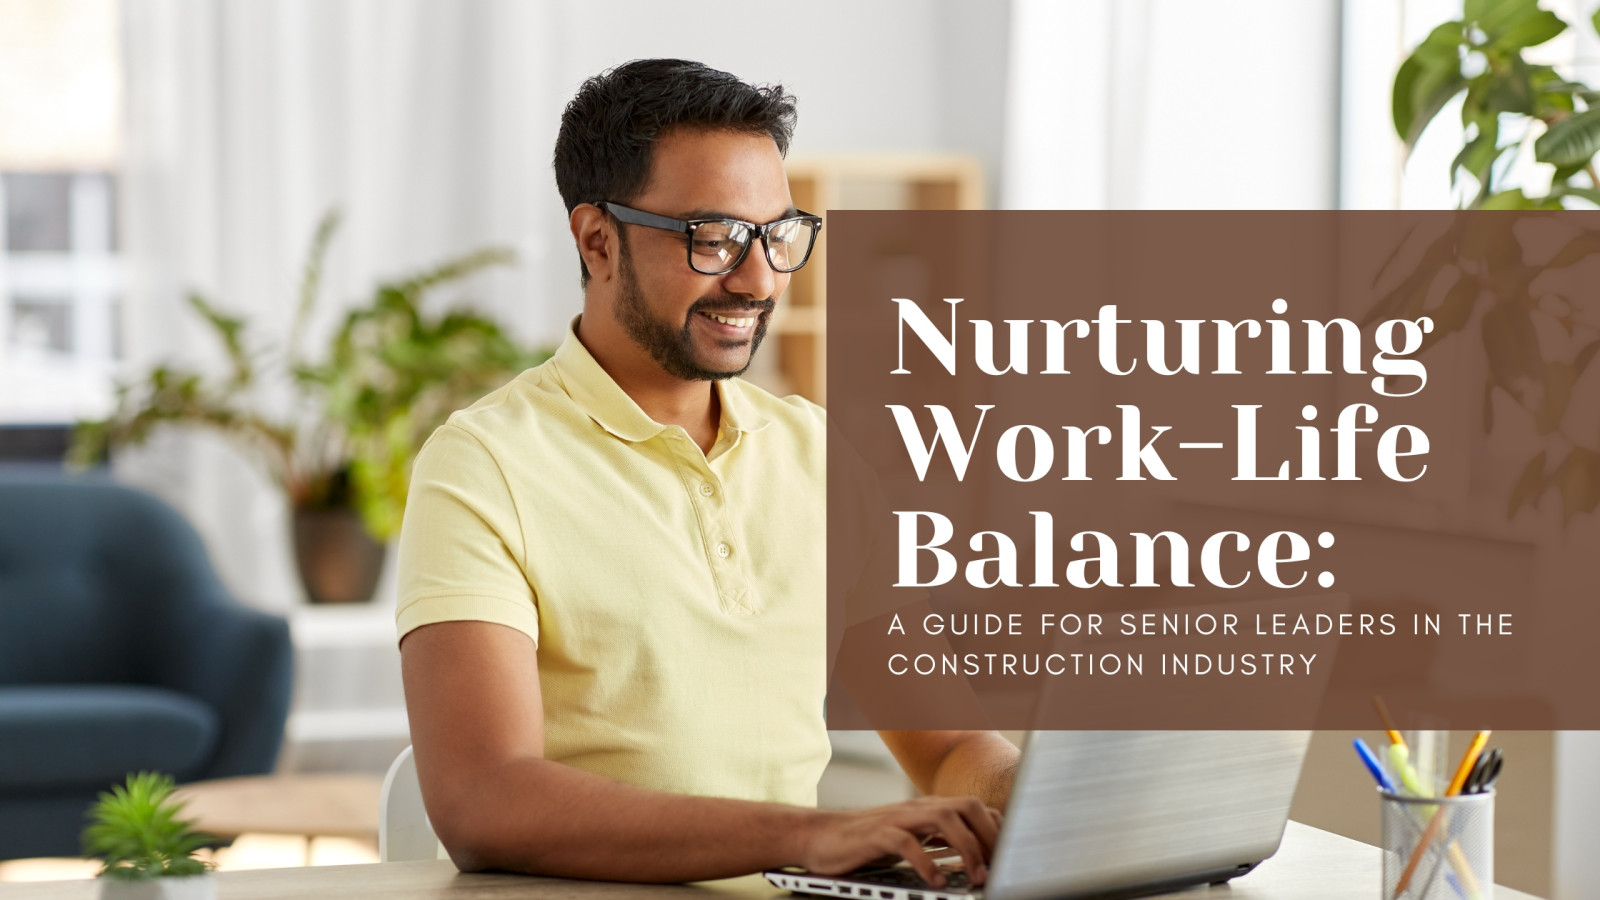 Nurturing Work-Life Balance: A Guide for Senior Leaders in the Construction Industry